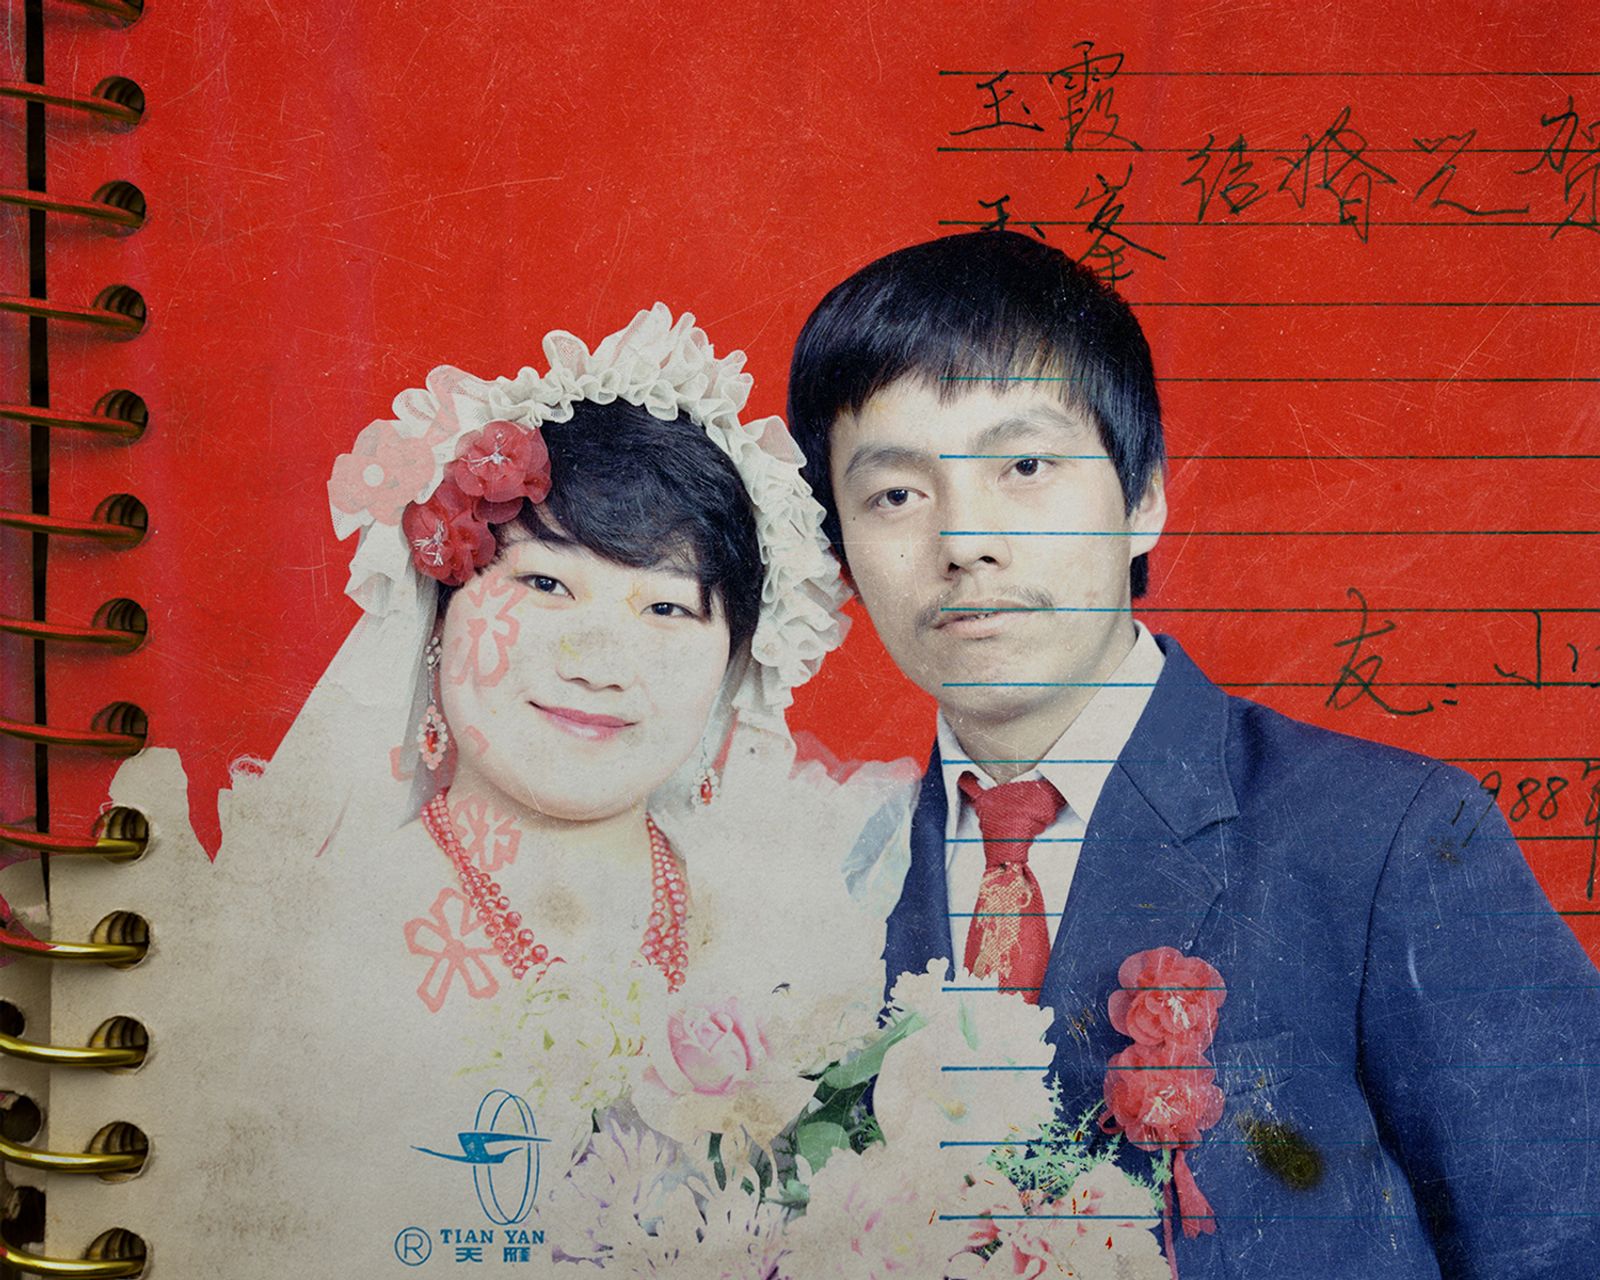 © Lu Wang - Frozen are the winds of time #03 Parents' wedding photo